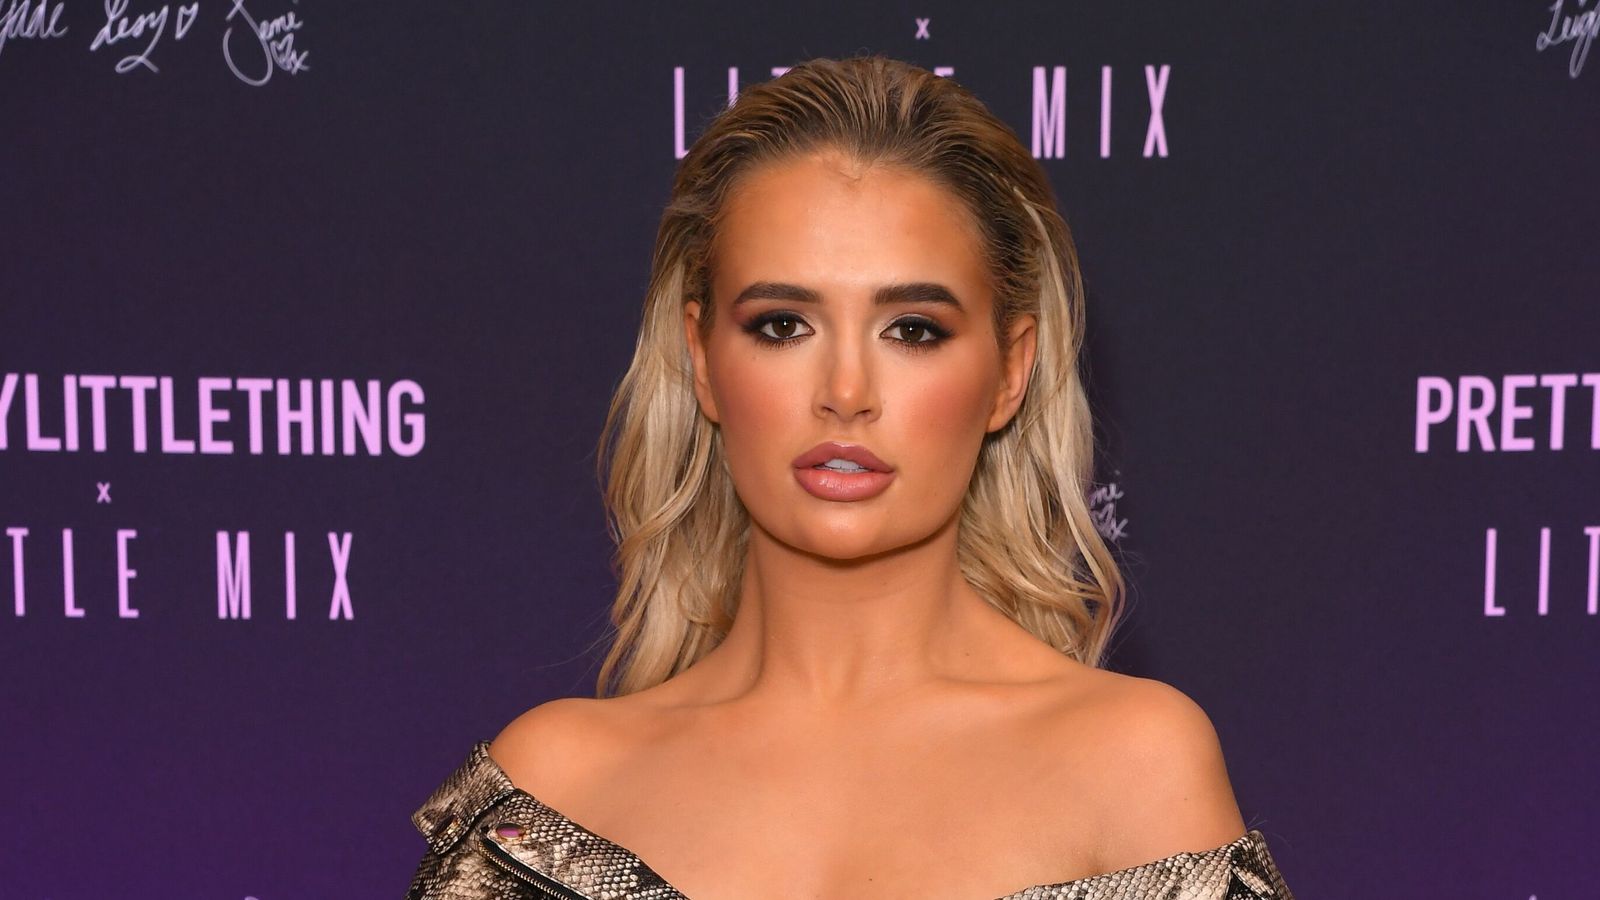 Love Island's Molly-Mae Hague blasted after 'Thatcherite' comments